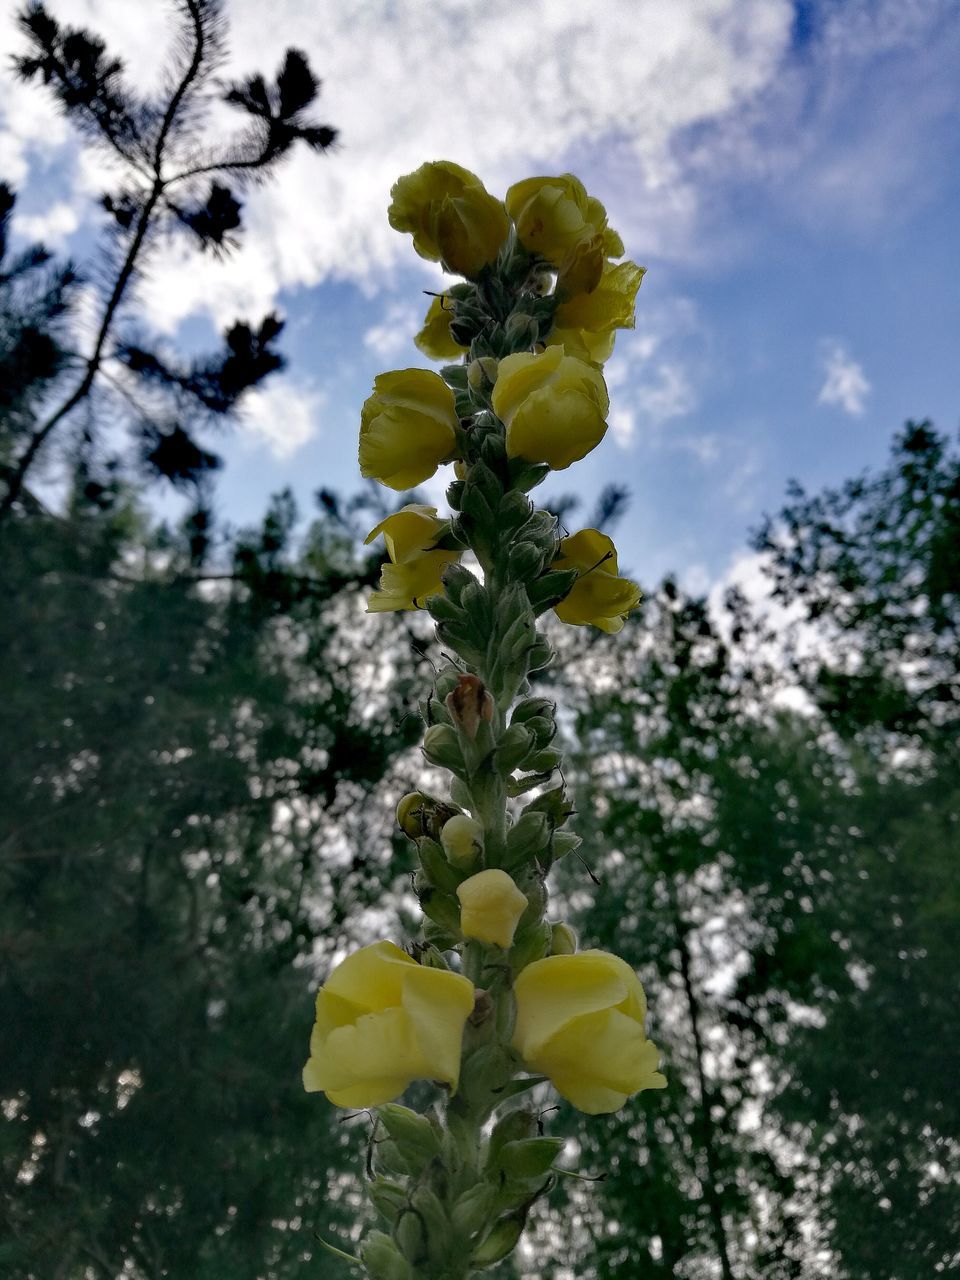 plant, growth, beauty in nature, flowering plant, flower, freshness, vulnerability, fragility, sky, nature, yellow, no people, tree, petal, close-up, day, cloud - sky, focus on foreground, outdoors, low angle view, flower head, springtime, spring